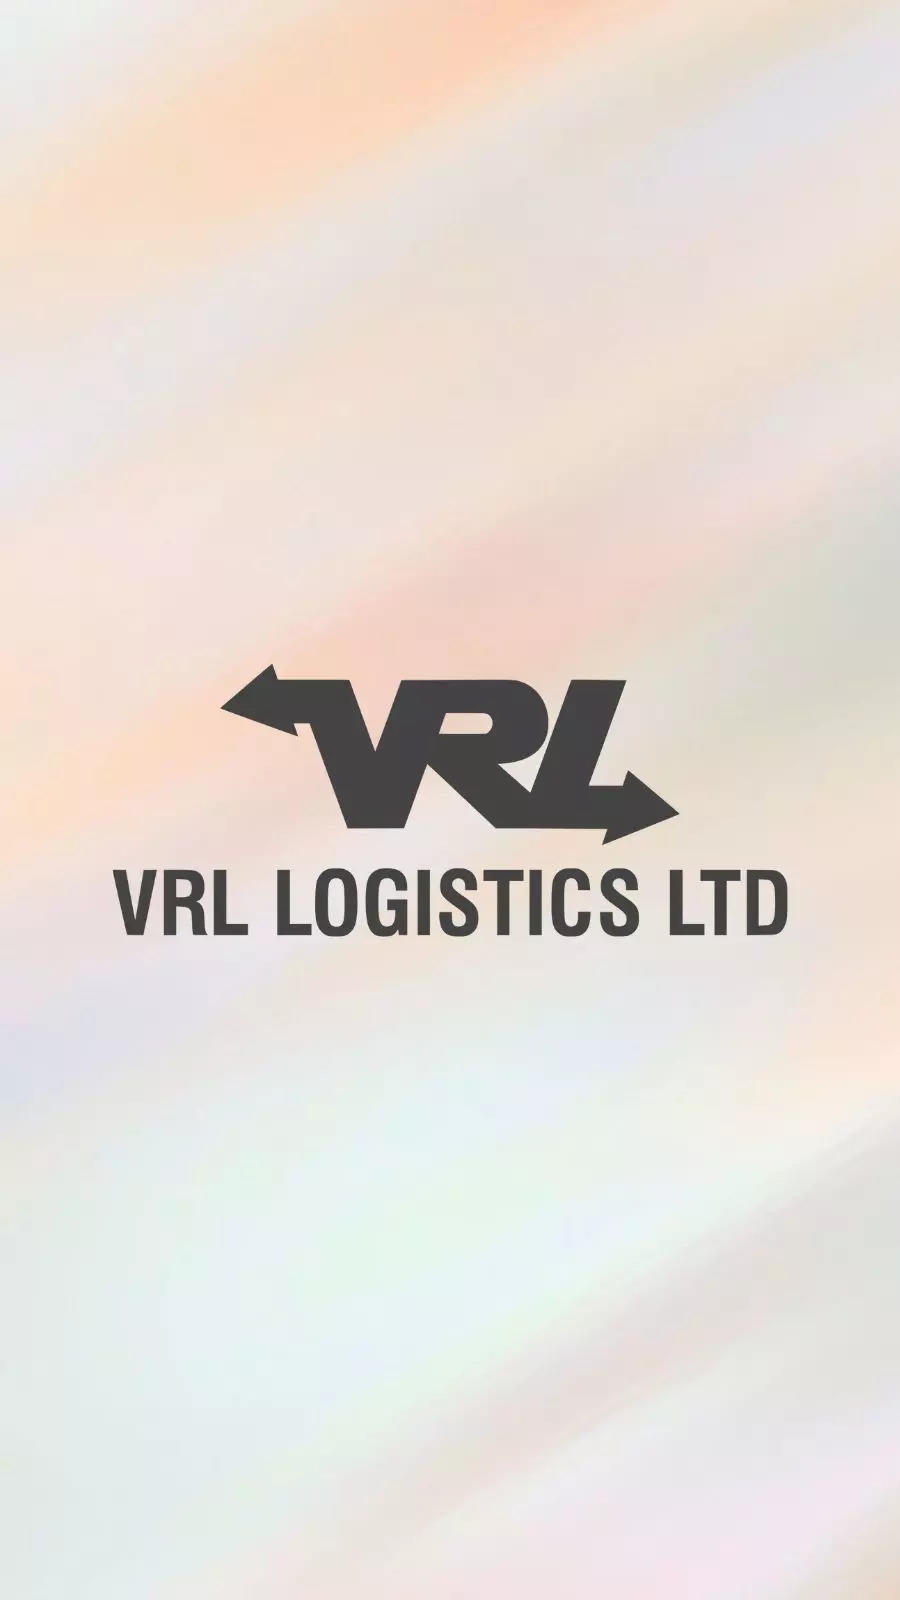 VRL LOGISTICS LTD on LinkedIn: Its a Thread that binds our life & our Hearts